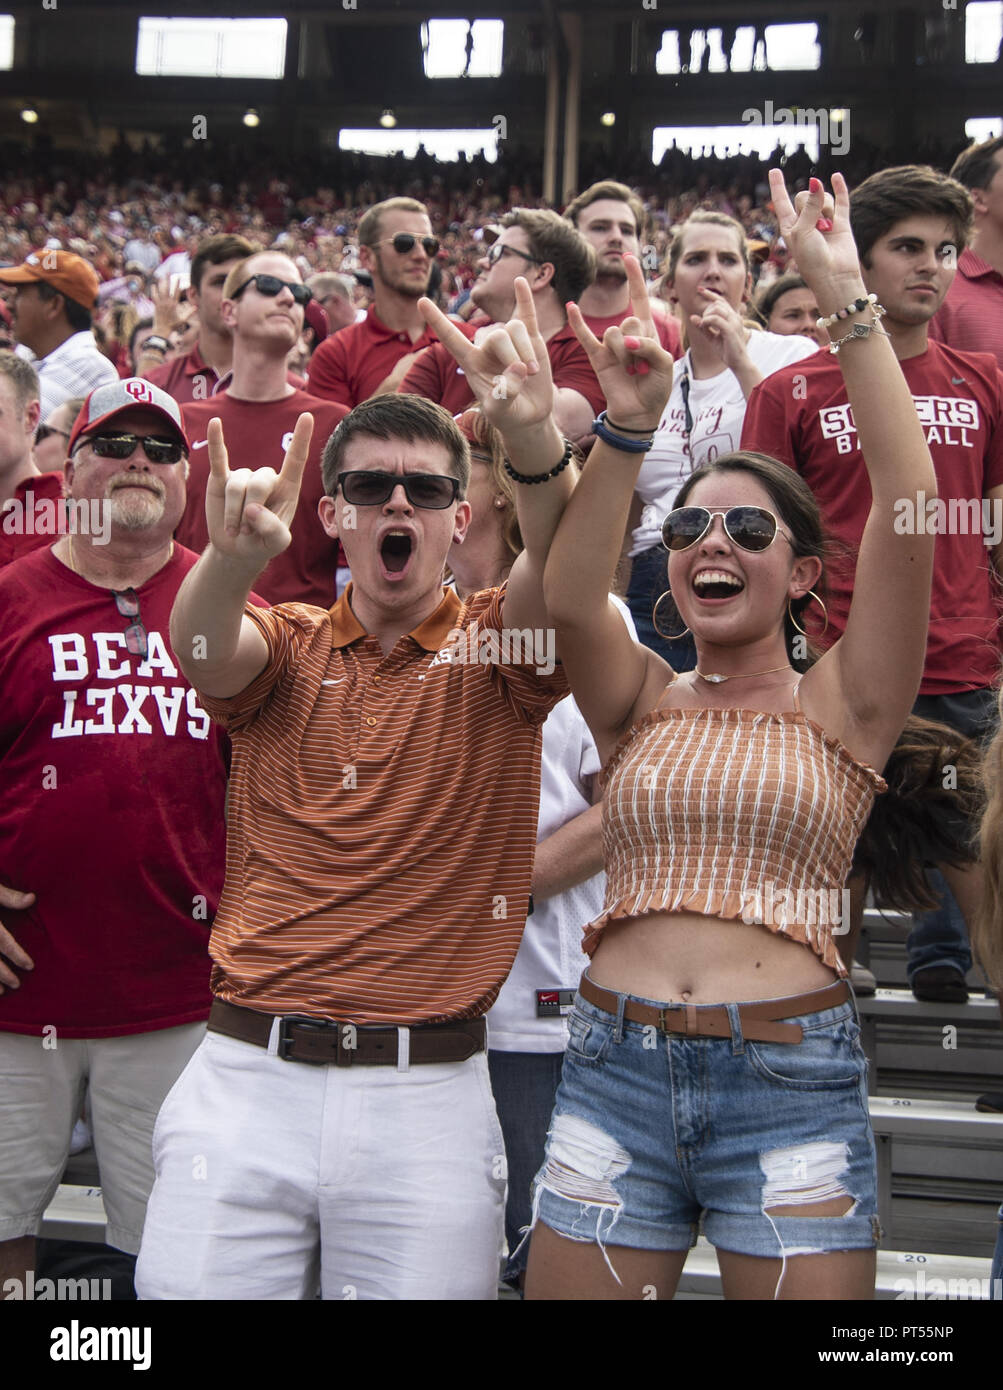 Dallas, Texas, USA. 6th Oct, 2018. UT fans feeling a win is imminent with 2 minutes left in the game. Credit: Hoss McBain/ZUMA Wire/Alamy Live News Stock Photo